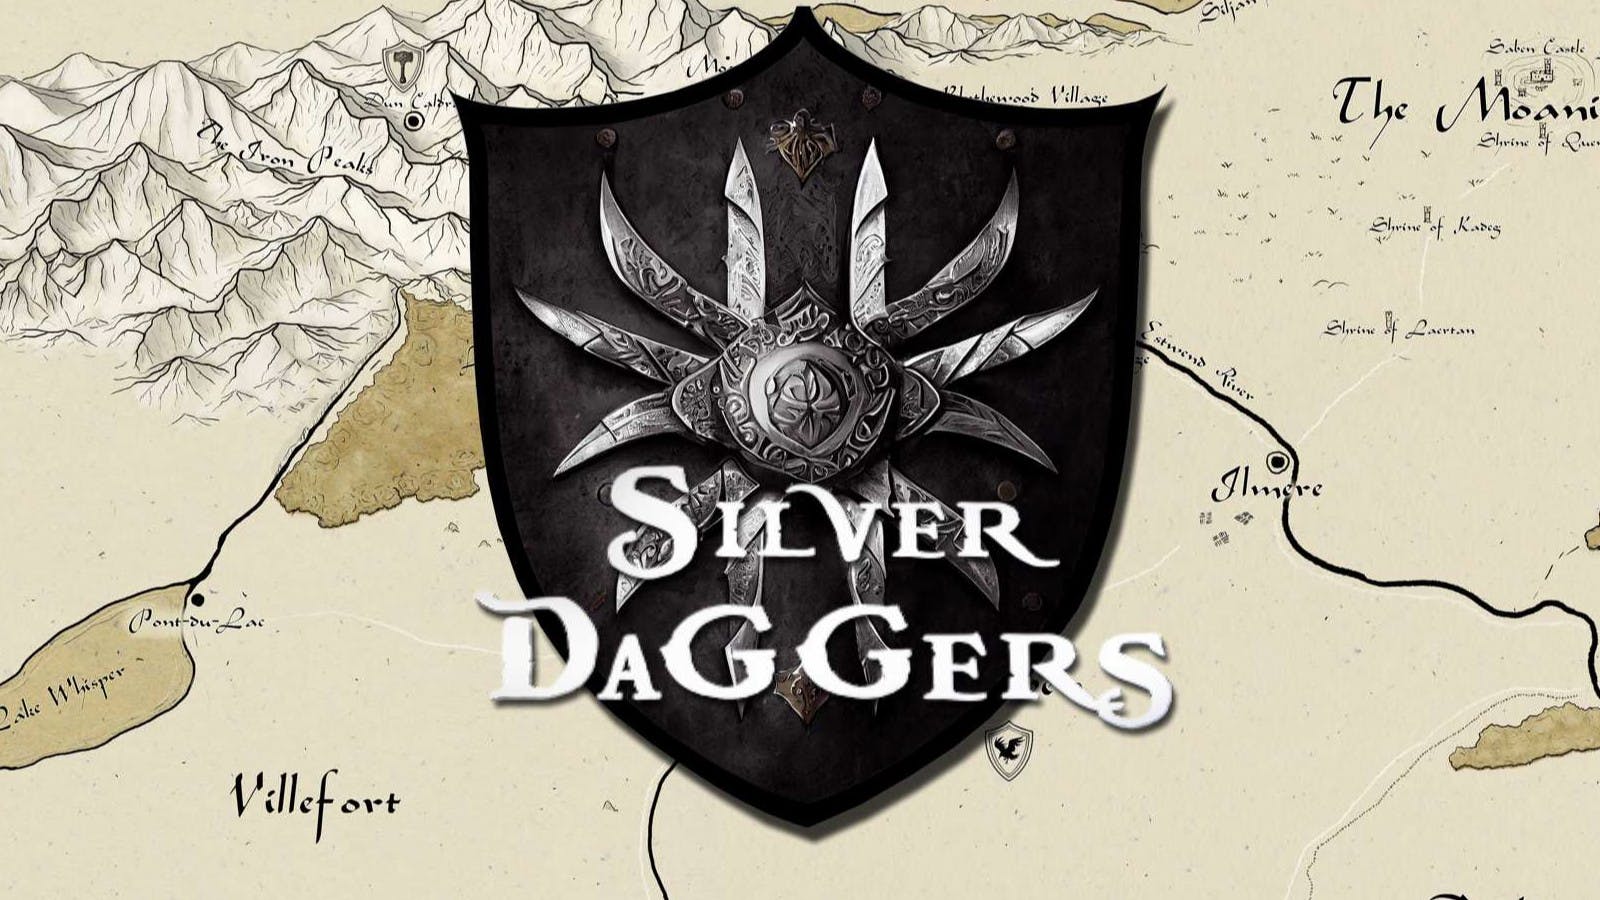 The Silver Daggers - For Gold, Guts & Glory